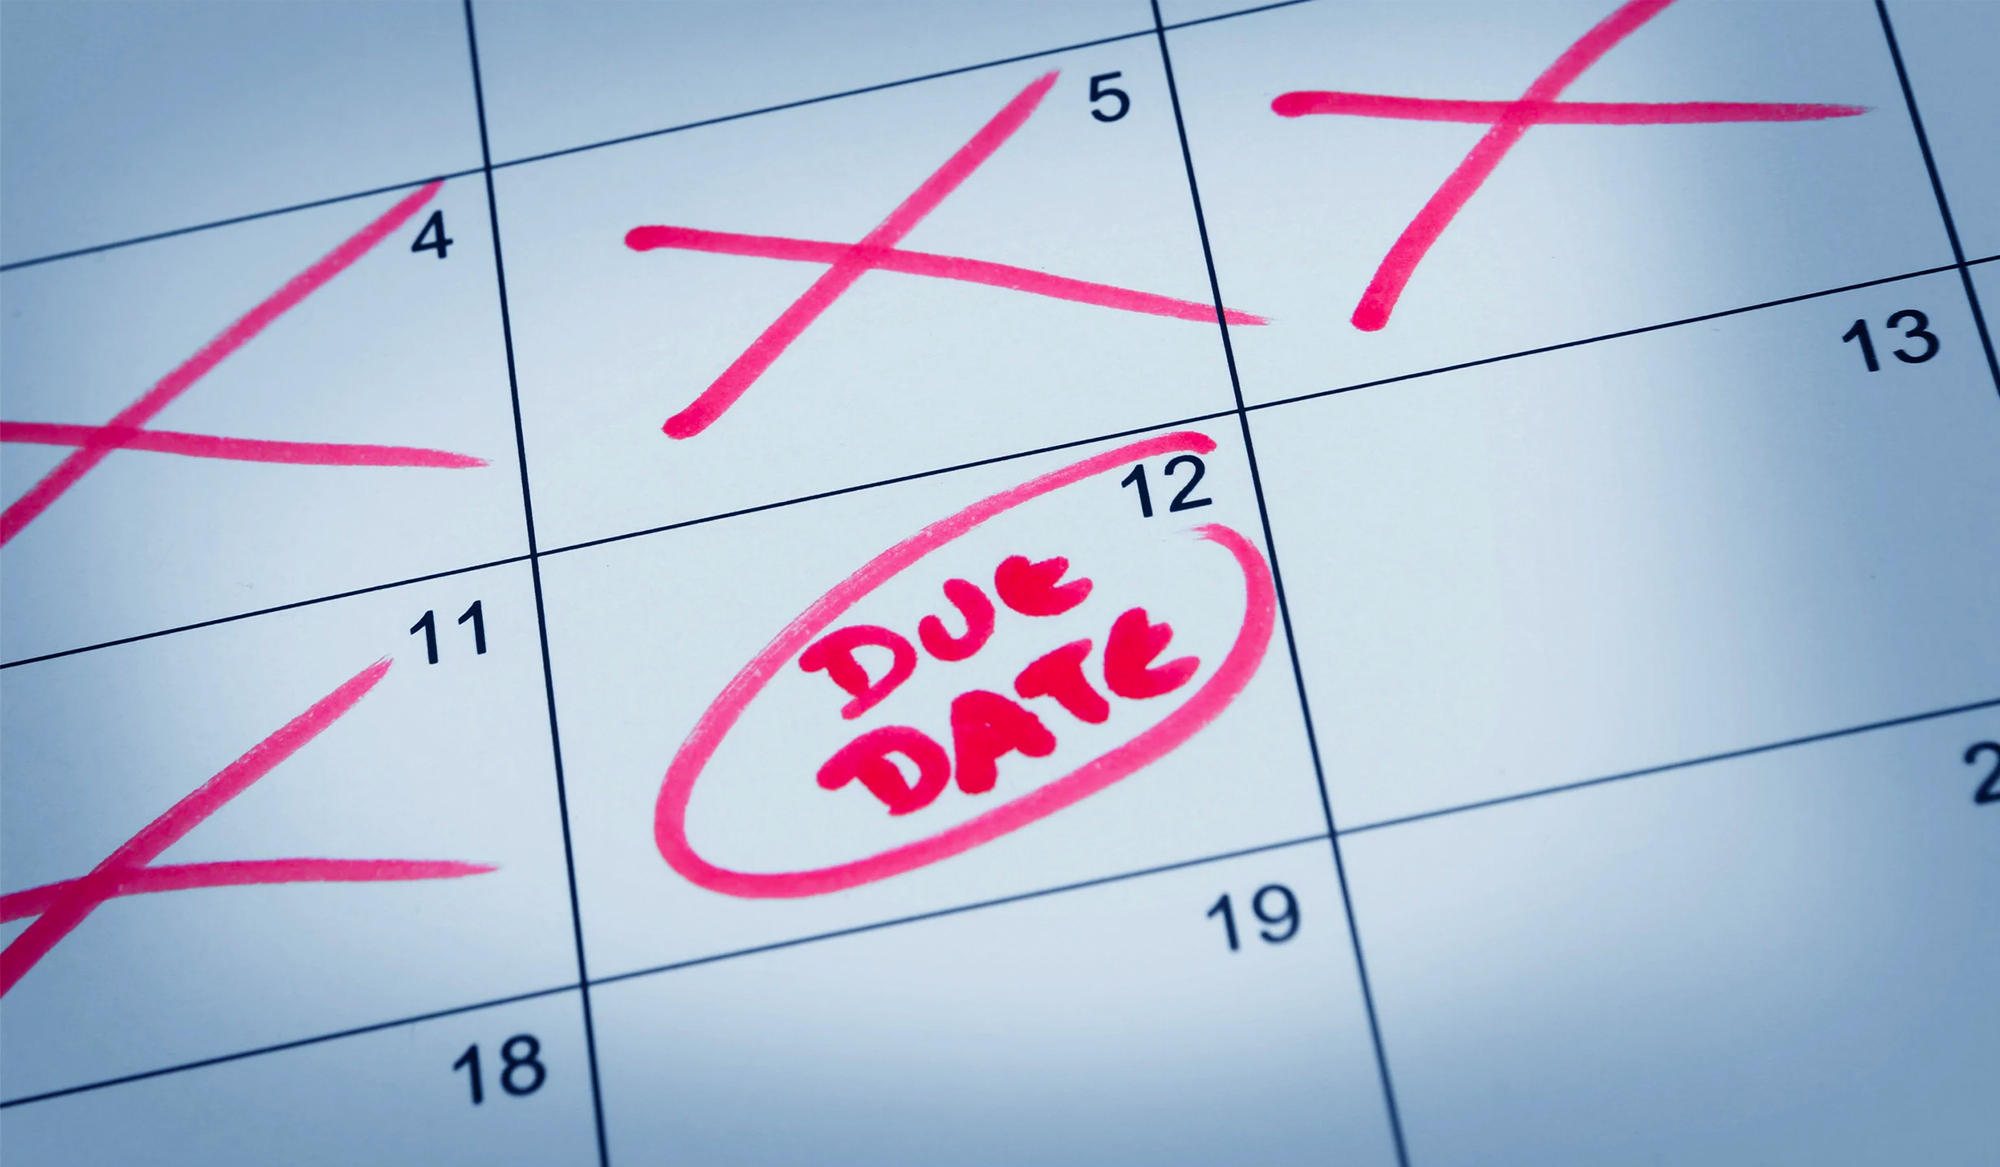 Collections due dates – Doing your due diligence